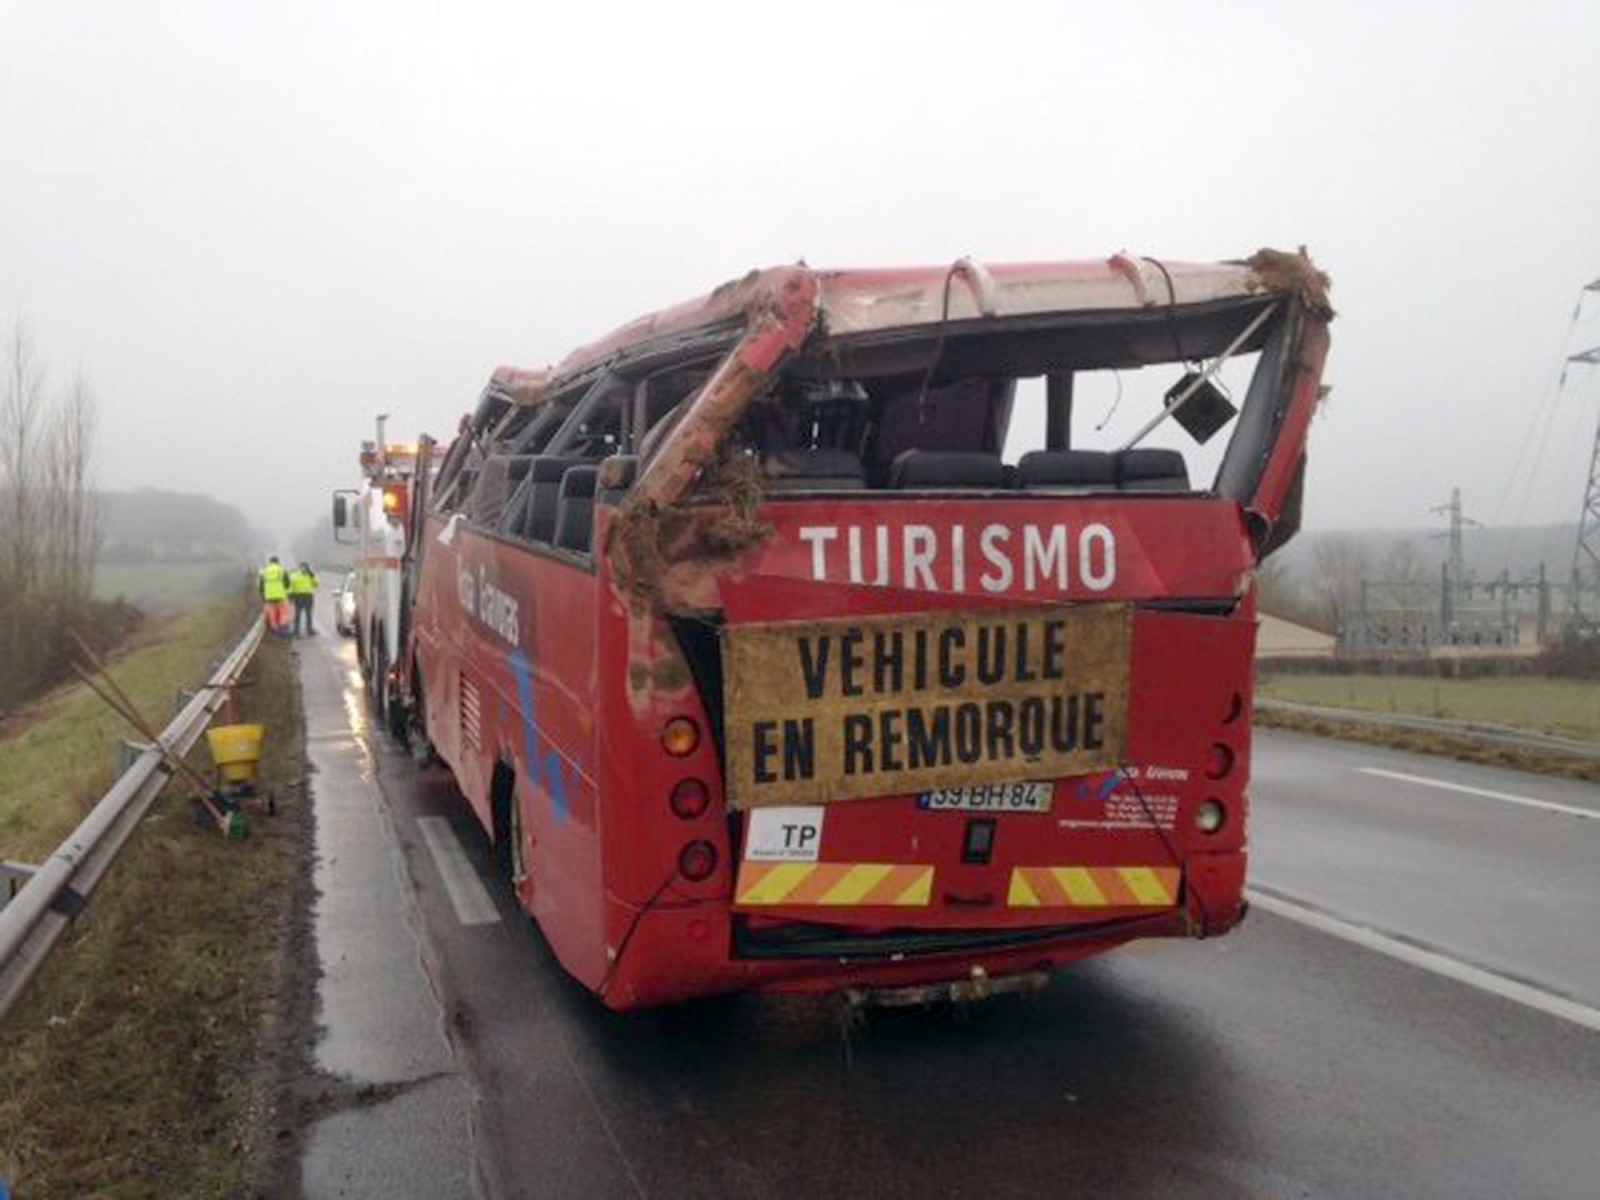 In this photo taken Sunday, Jan. 8, 2017, and provided by Creusot Infos, the wreckage of bus is towed away after it crashed off a highway near Charolles, central France, Sunday, Jan. 8, 2017. Four Portuguese tourists were killed and some 20 others injured today when their bus crashed off a highway in central France. (Creusot Infos via AP) FRANCE OUT France Bus Accident